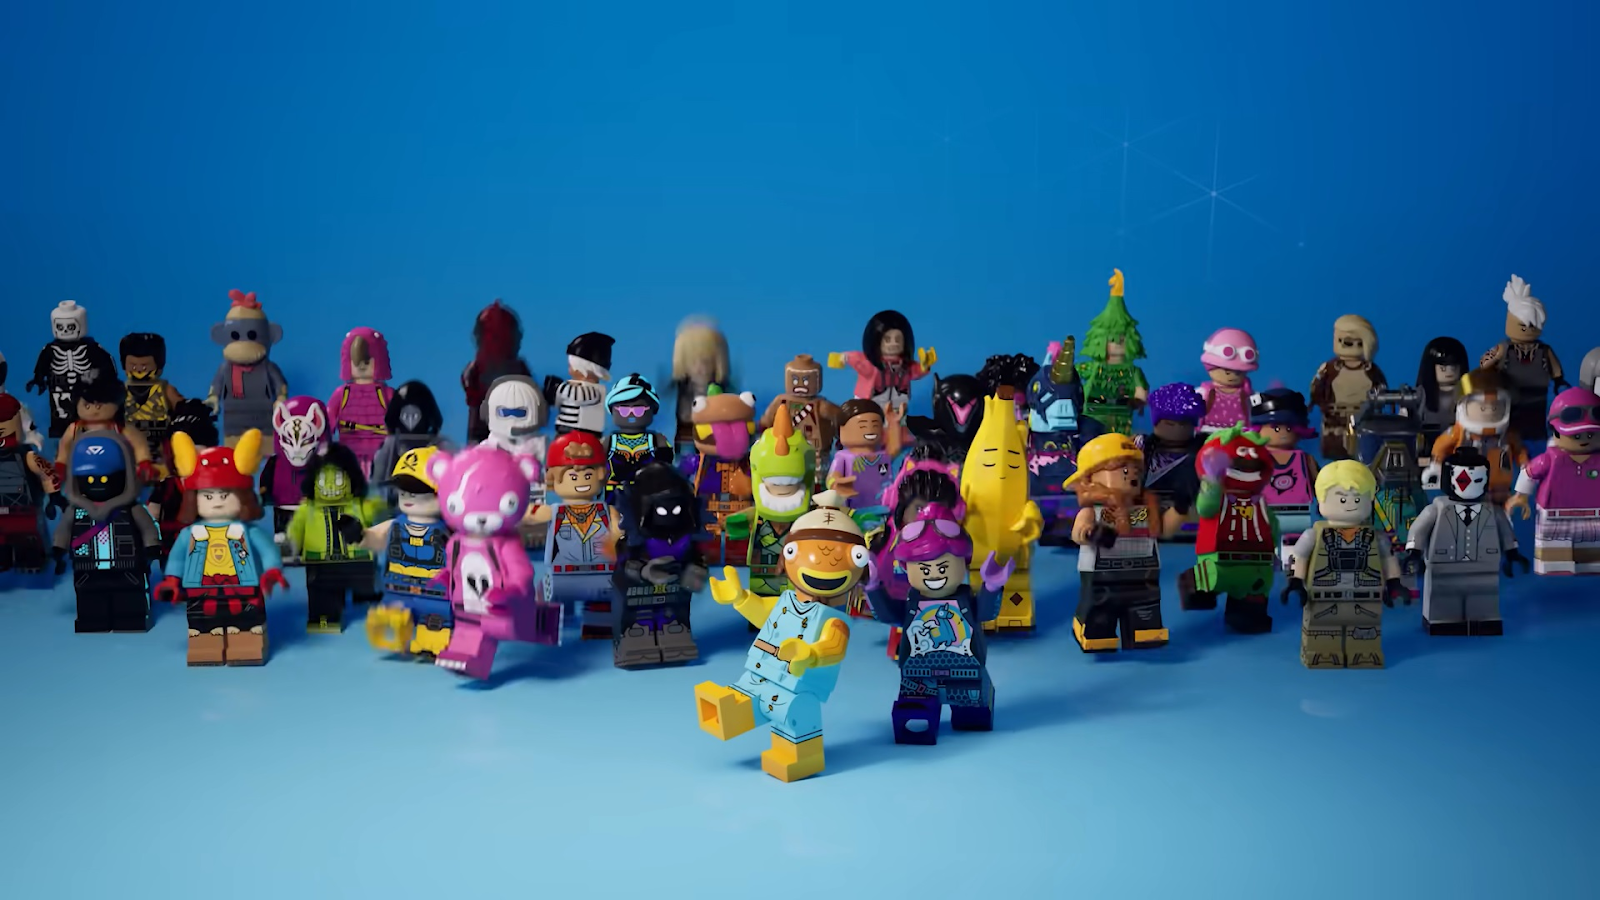 You can get hundreds of lego styles